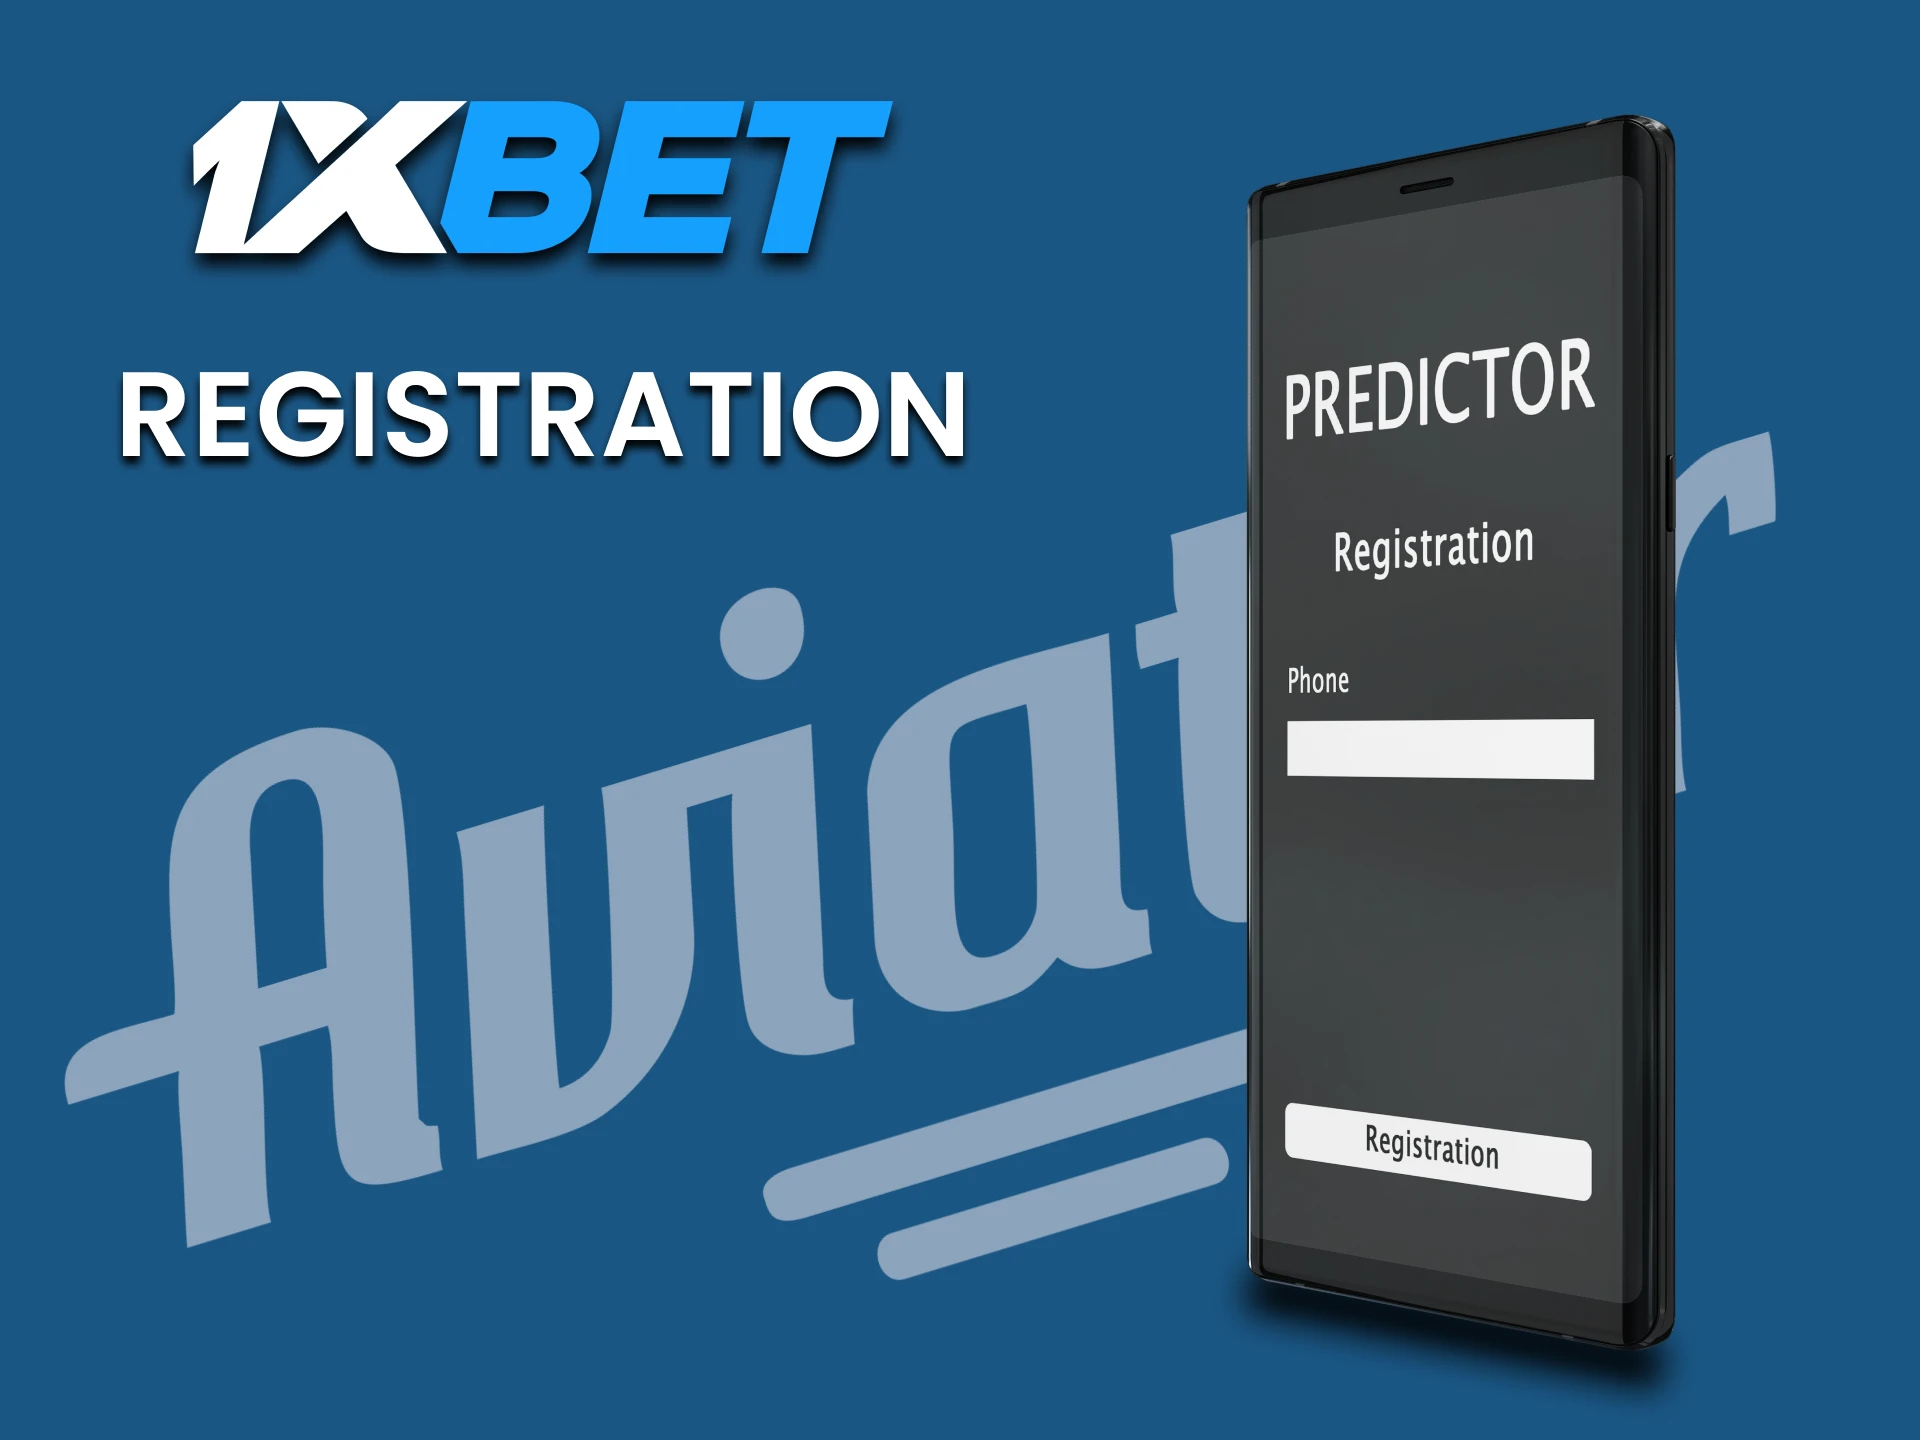 To use Predictor in the Aviator game on 1xbet you need to register